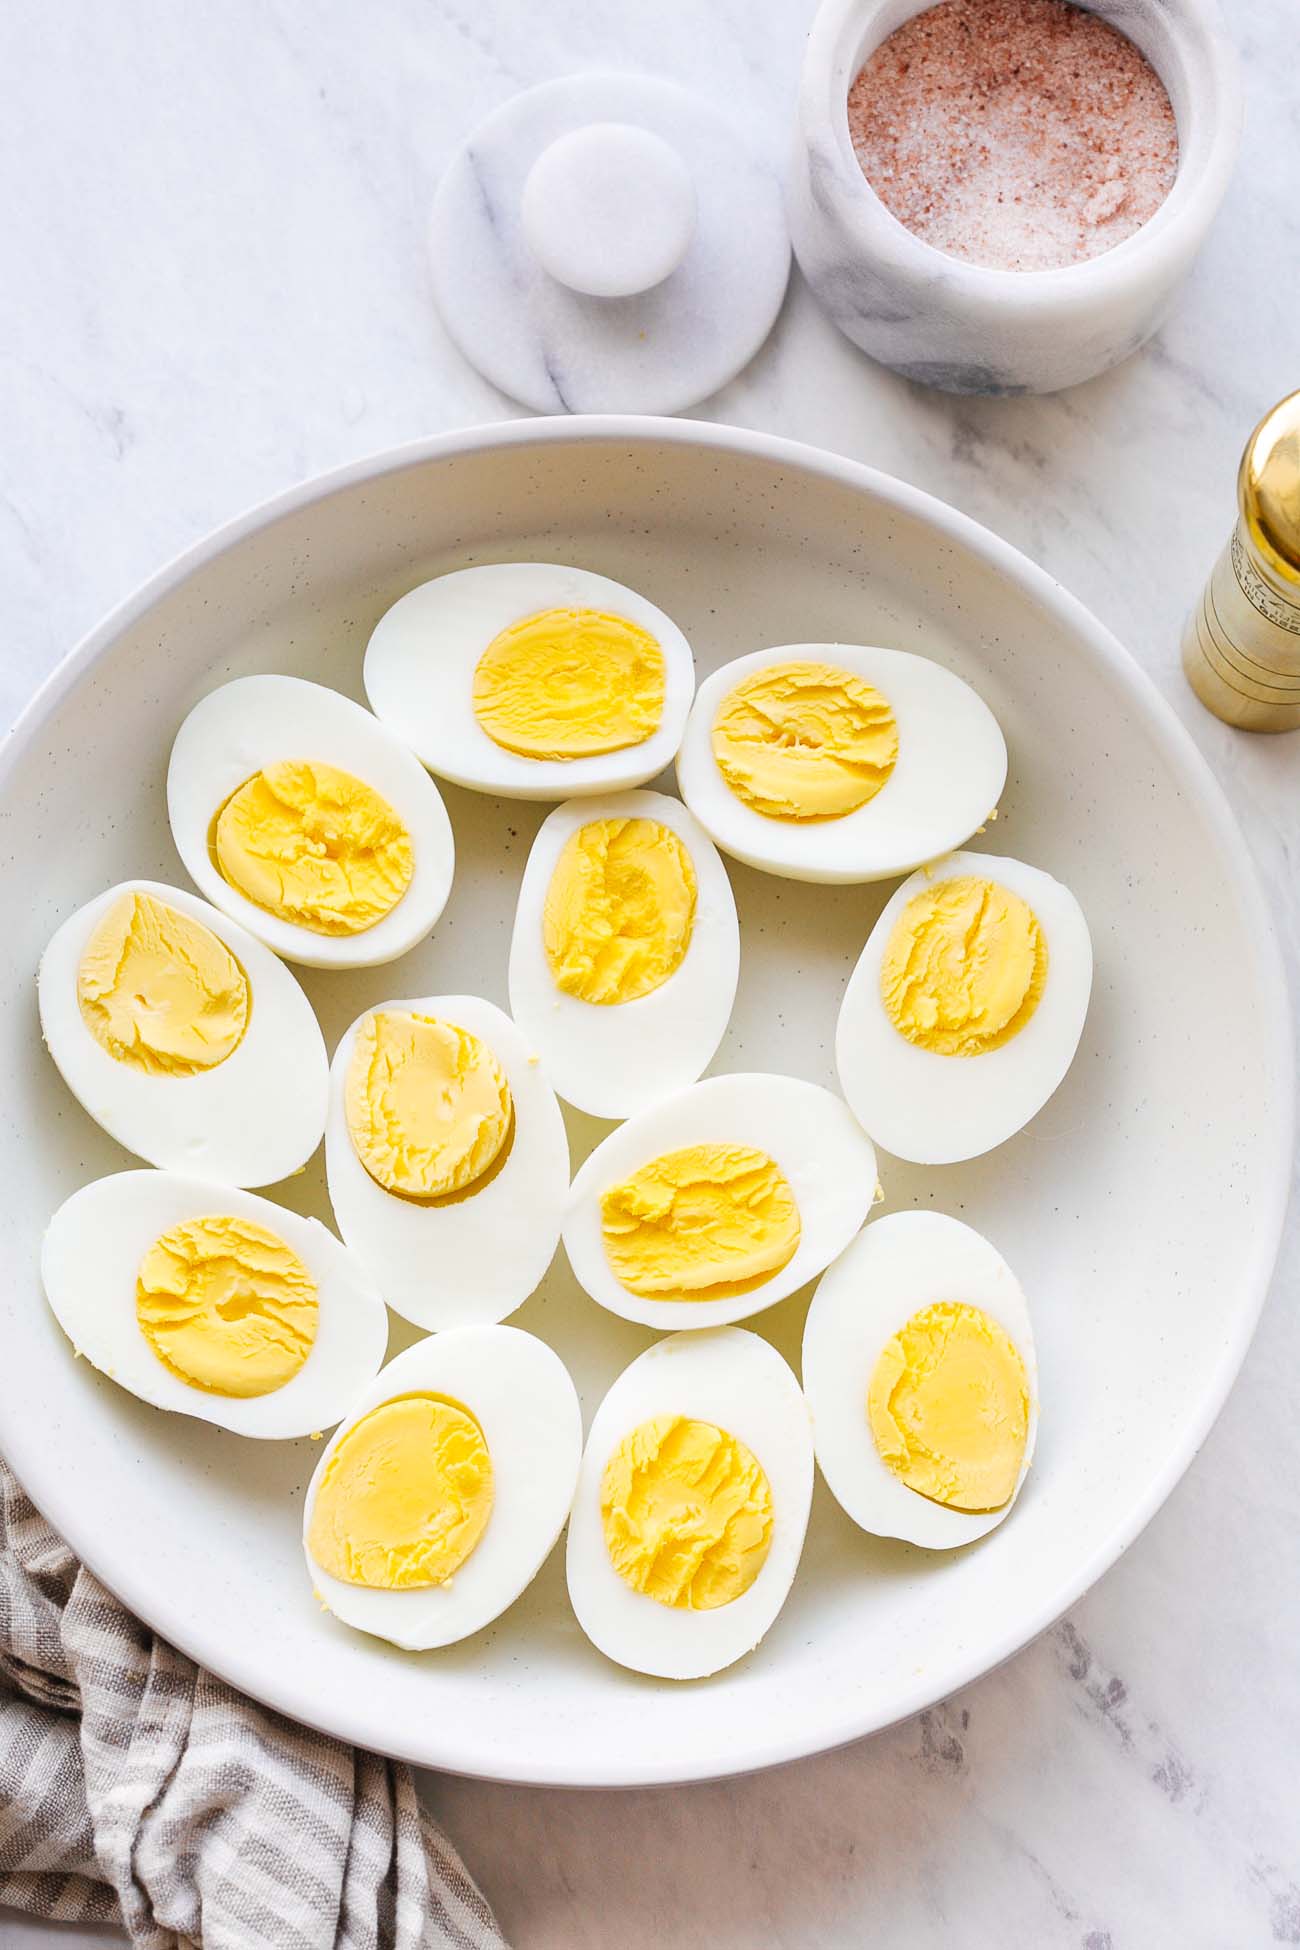 A plate with 12 halves of hard boiled eggs.